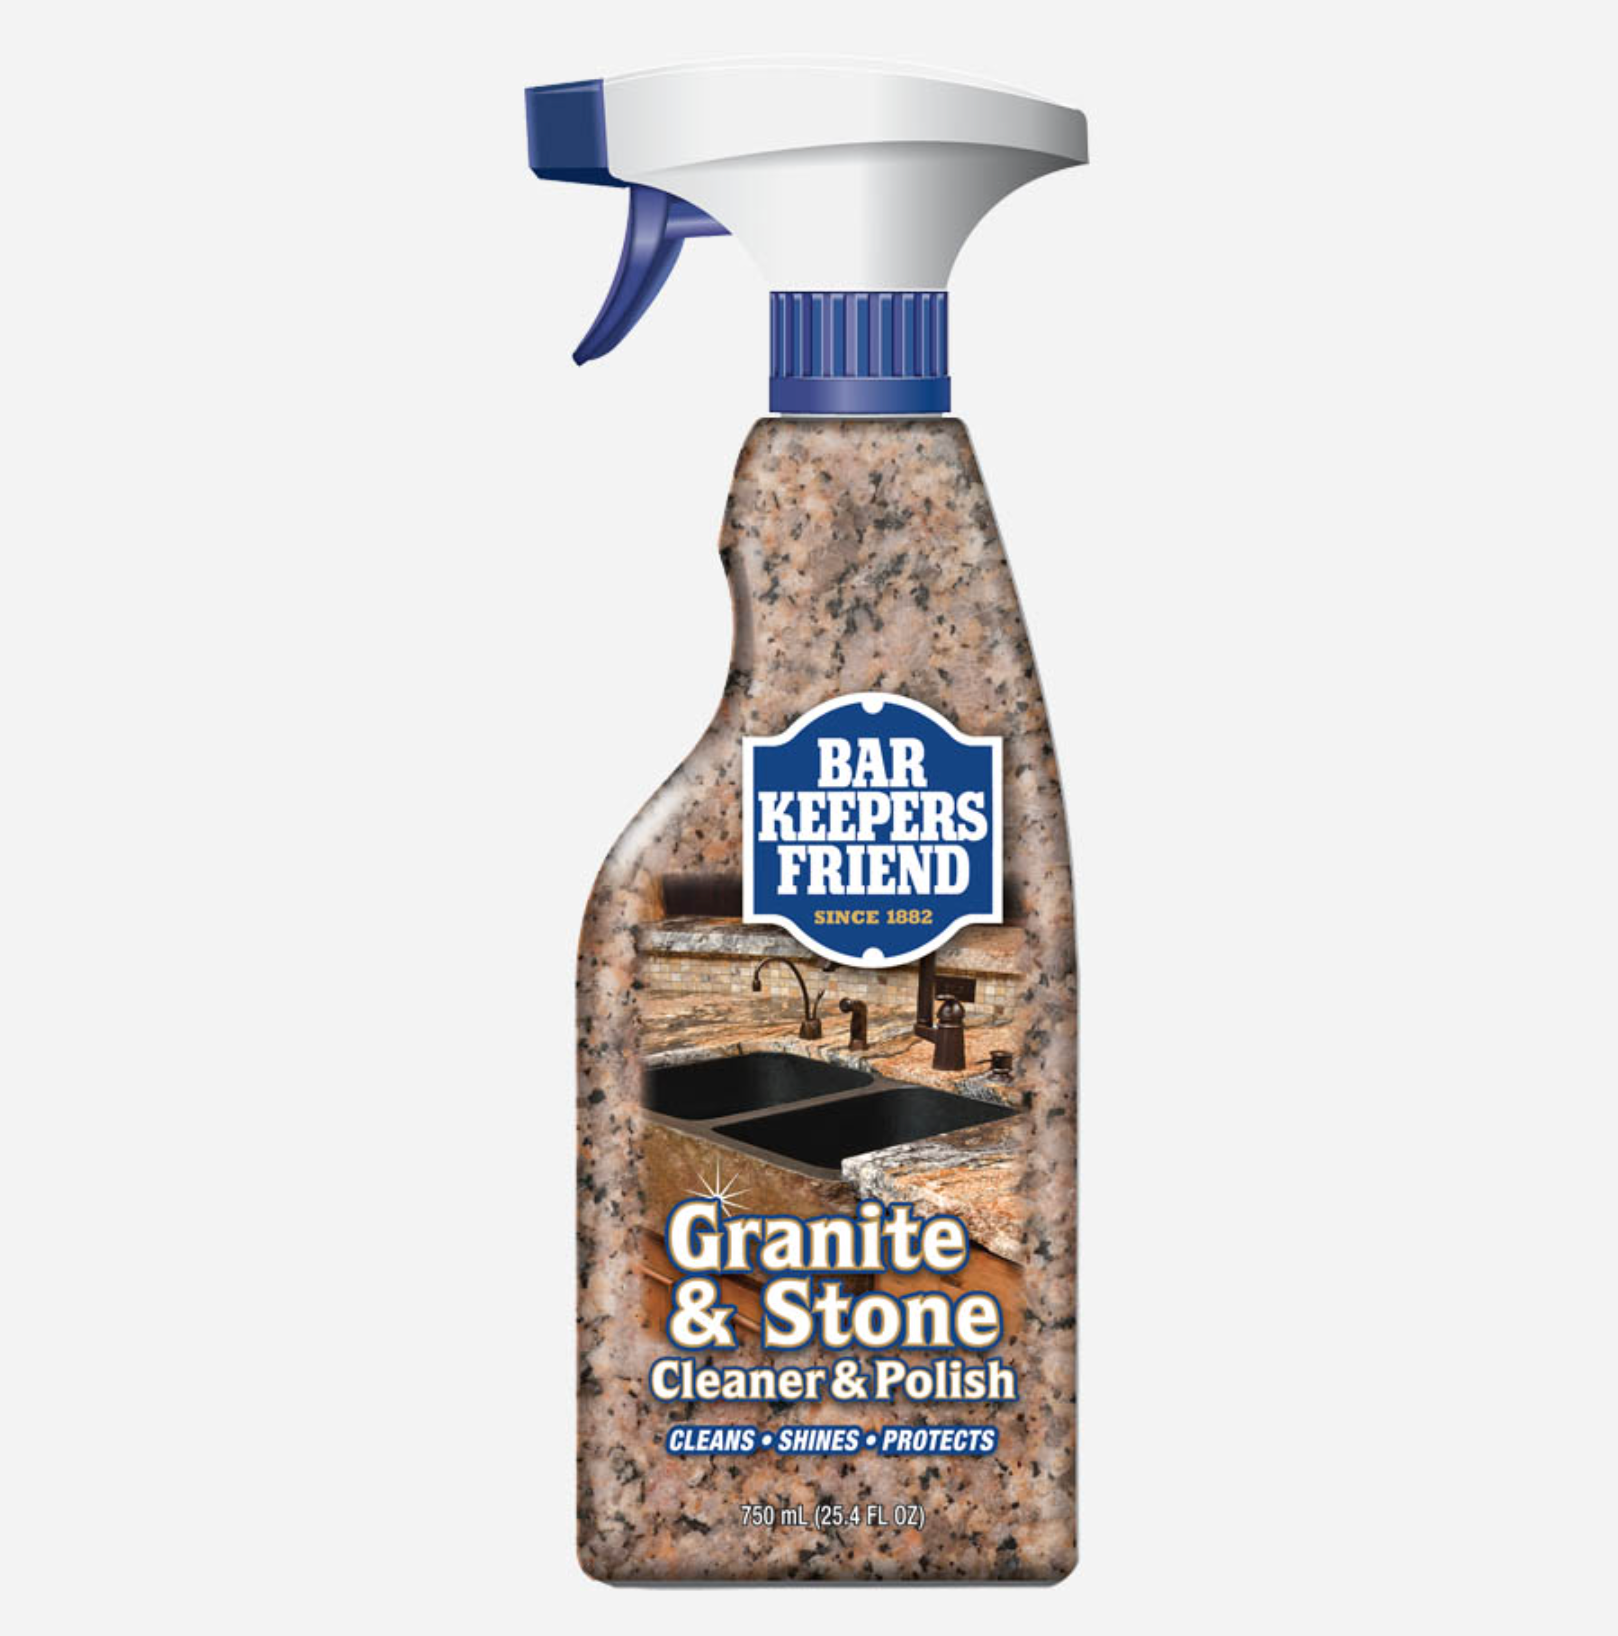 Bar Keepers Friend Granite and Stone Cleaner